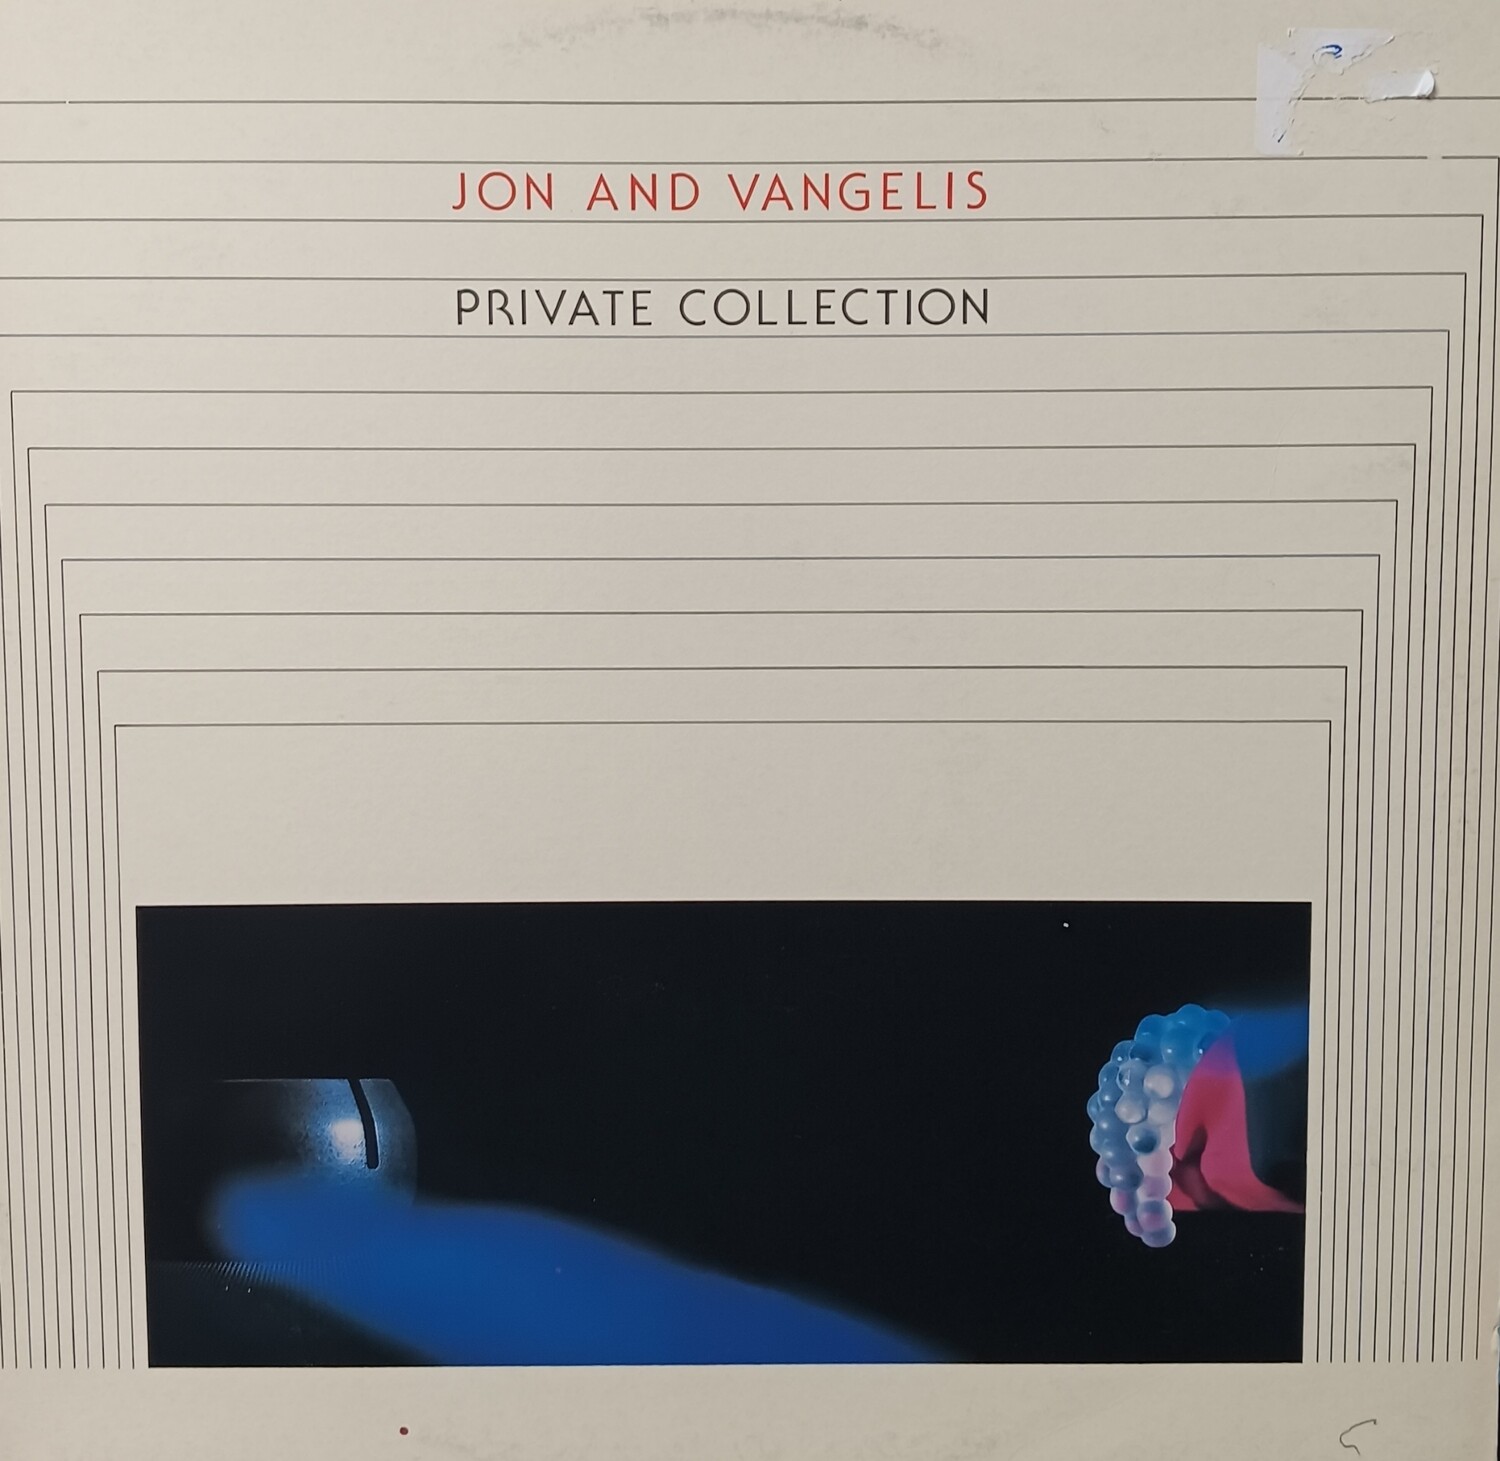 JON AND VANGELIS - Private Collection